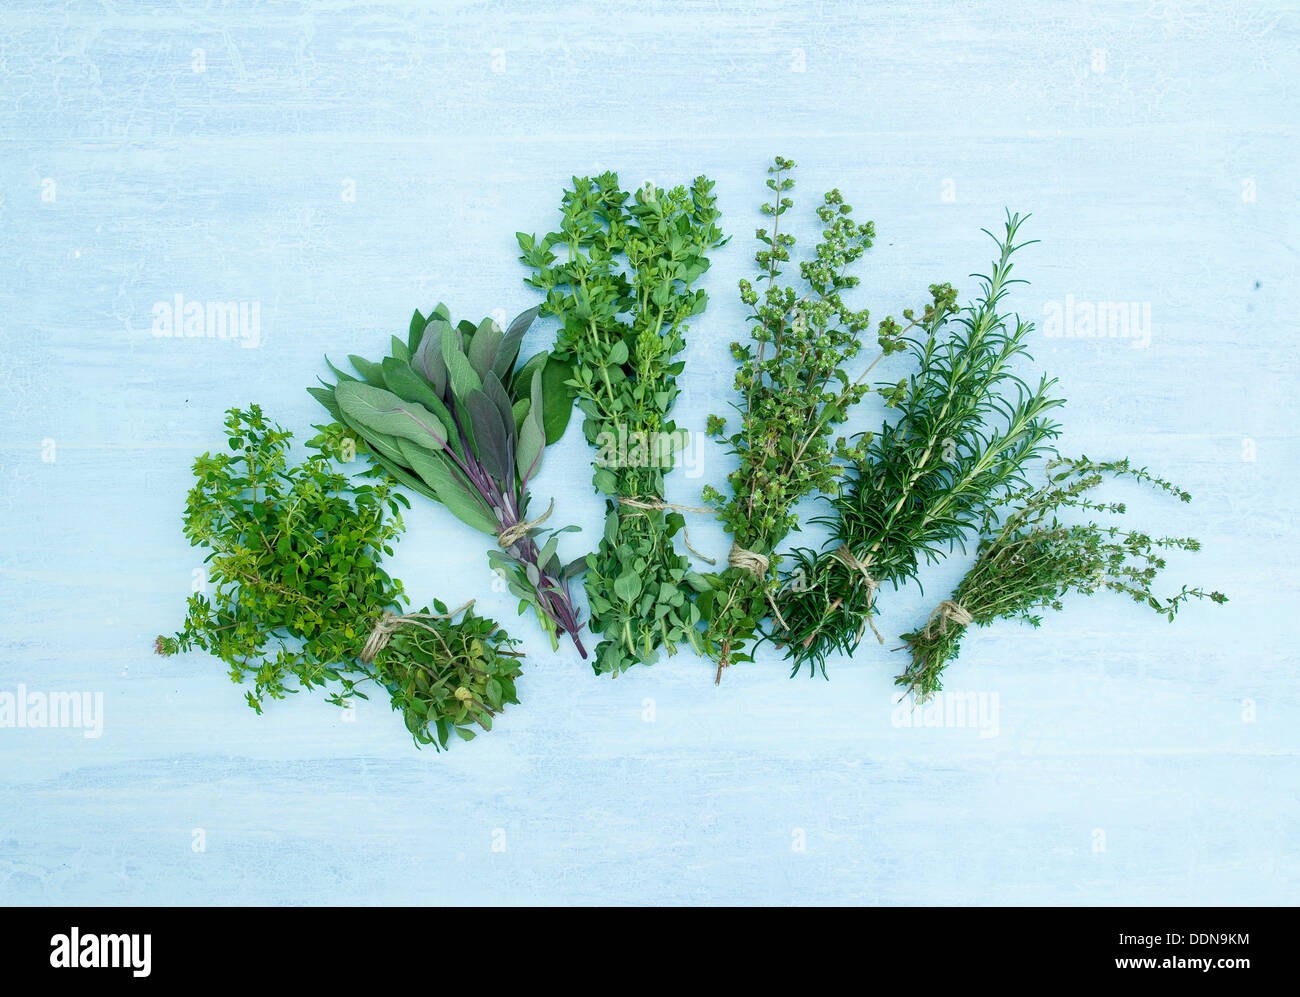 Bunches of marjoram, thyme, oregano, sage and rosemary tied up for drying on a rustic blue wood surface. Stock Photo